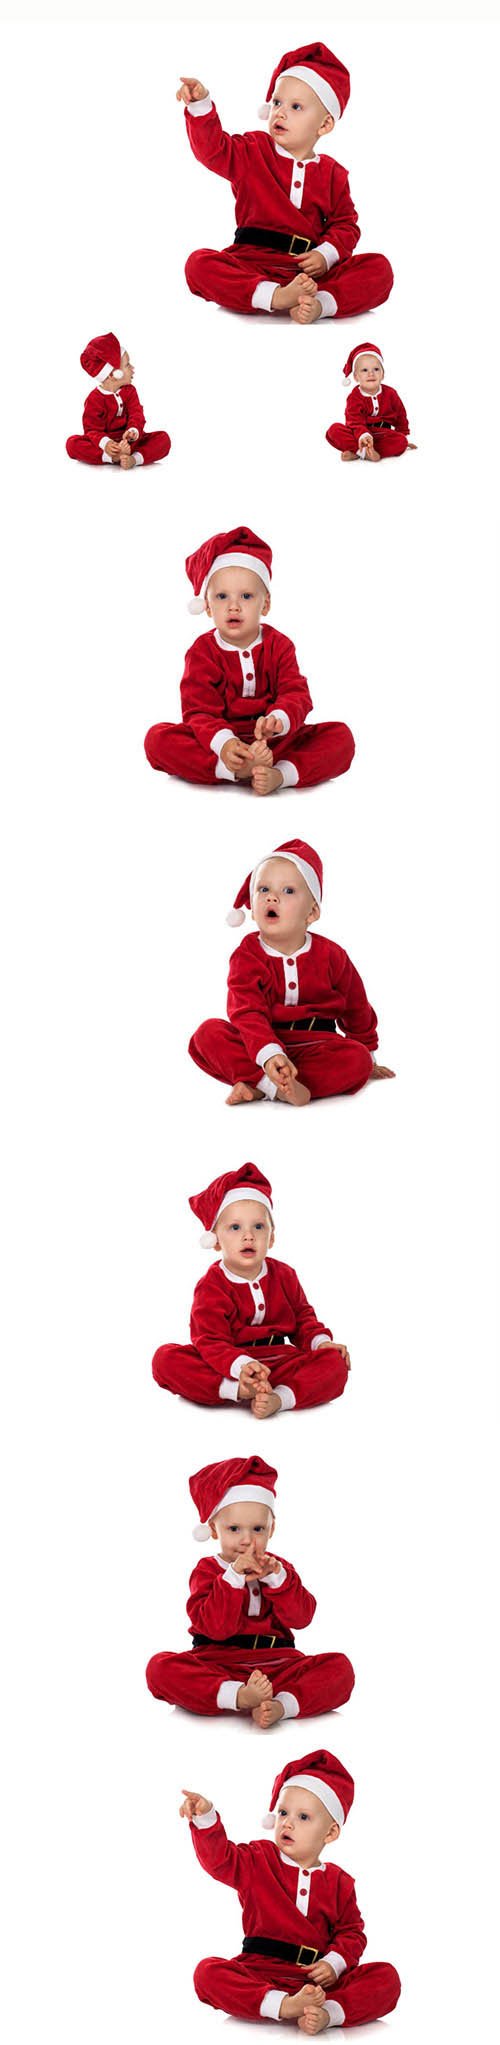 New Year and Christmas stock photos 83